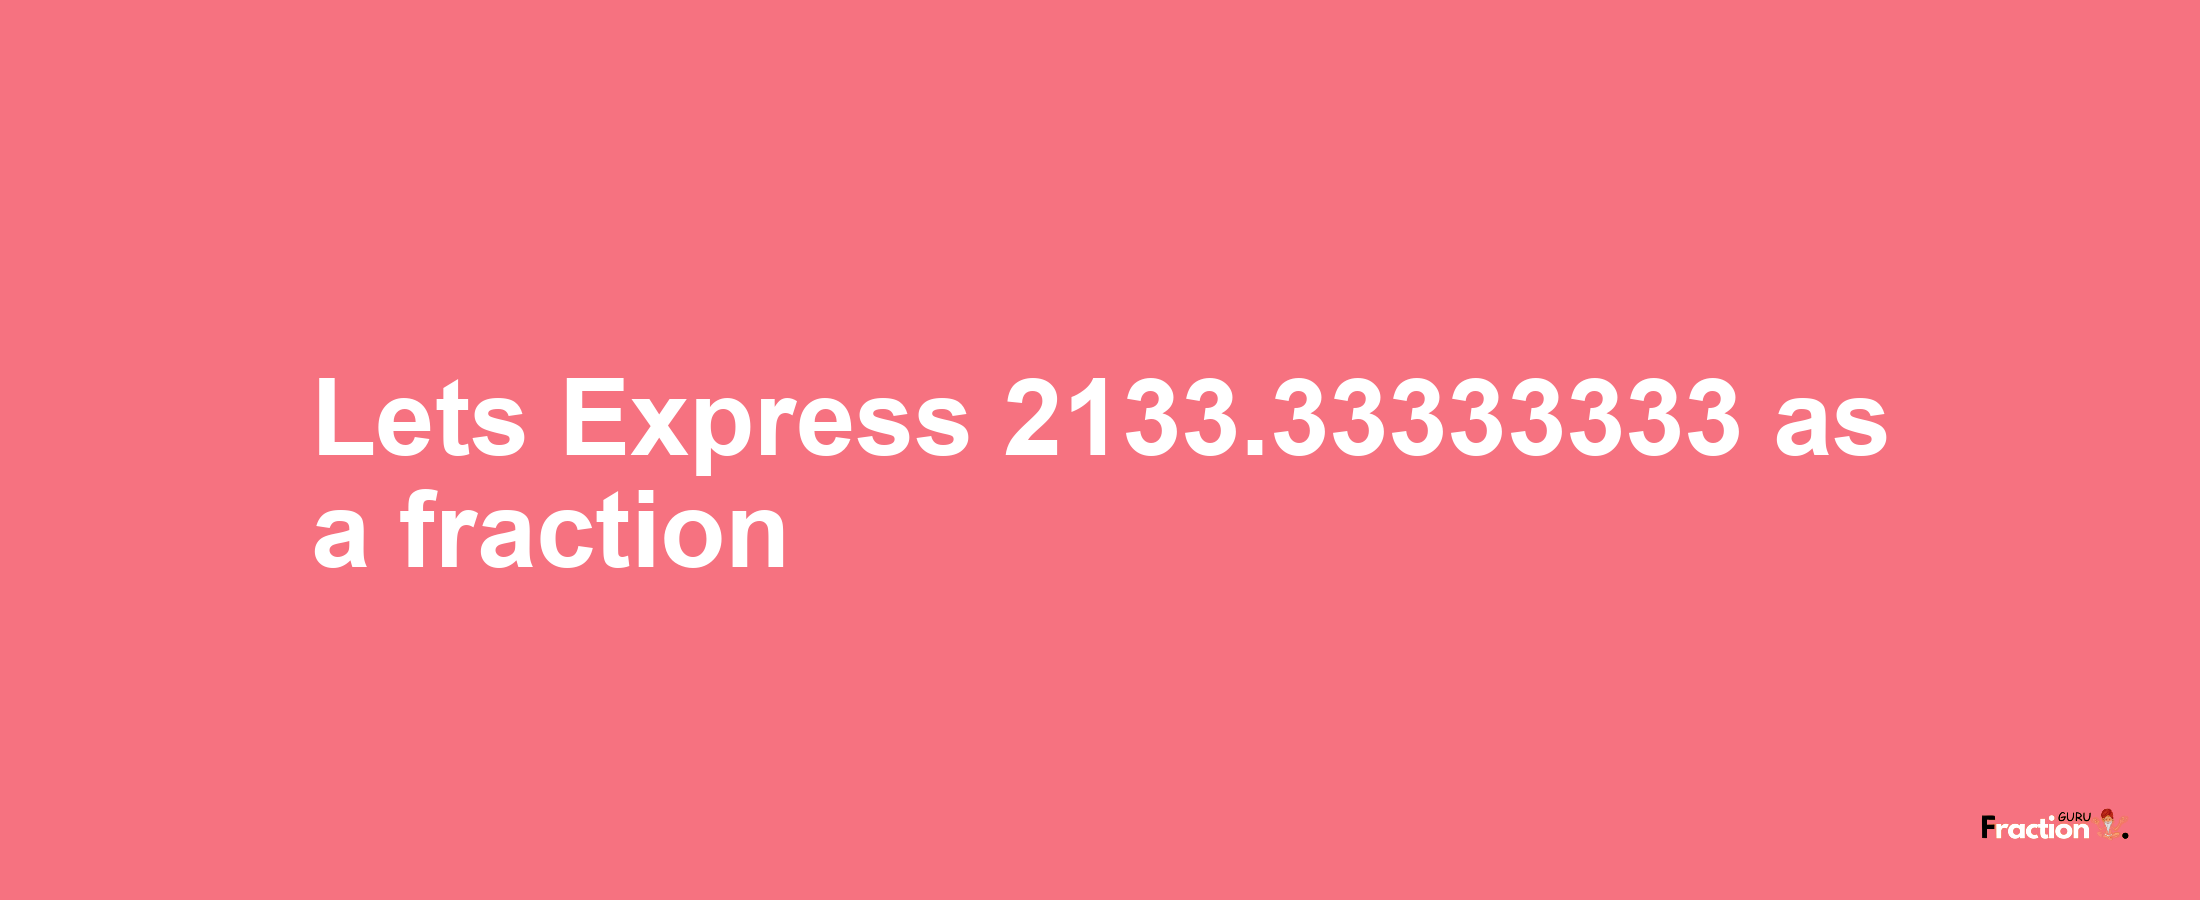 Lets Express 2133.33333333 as afraction